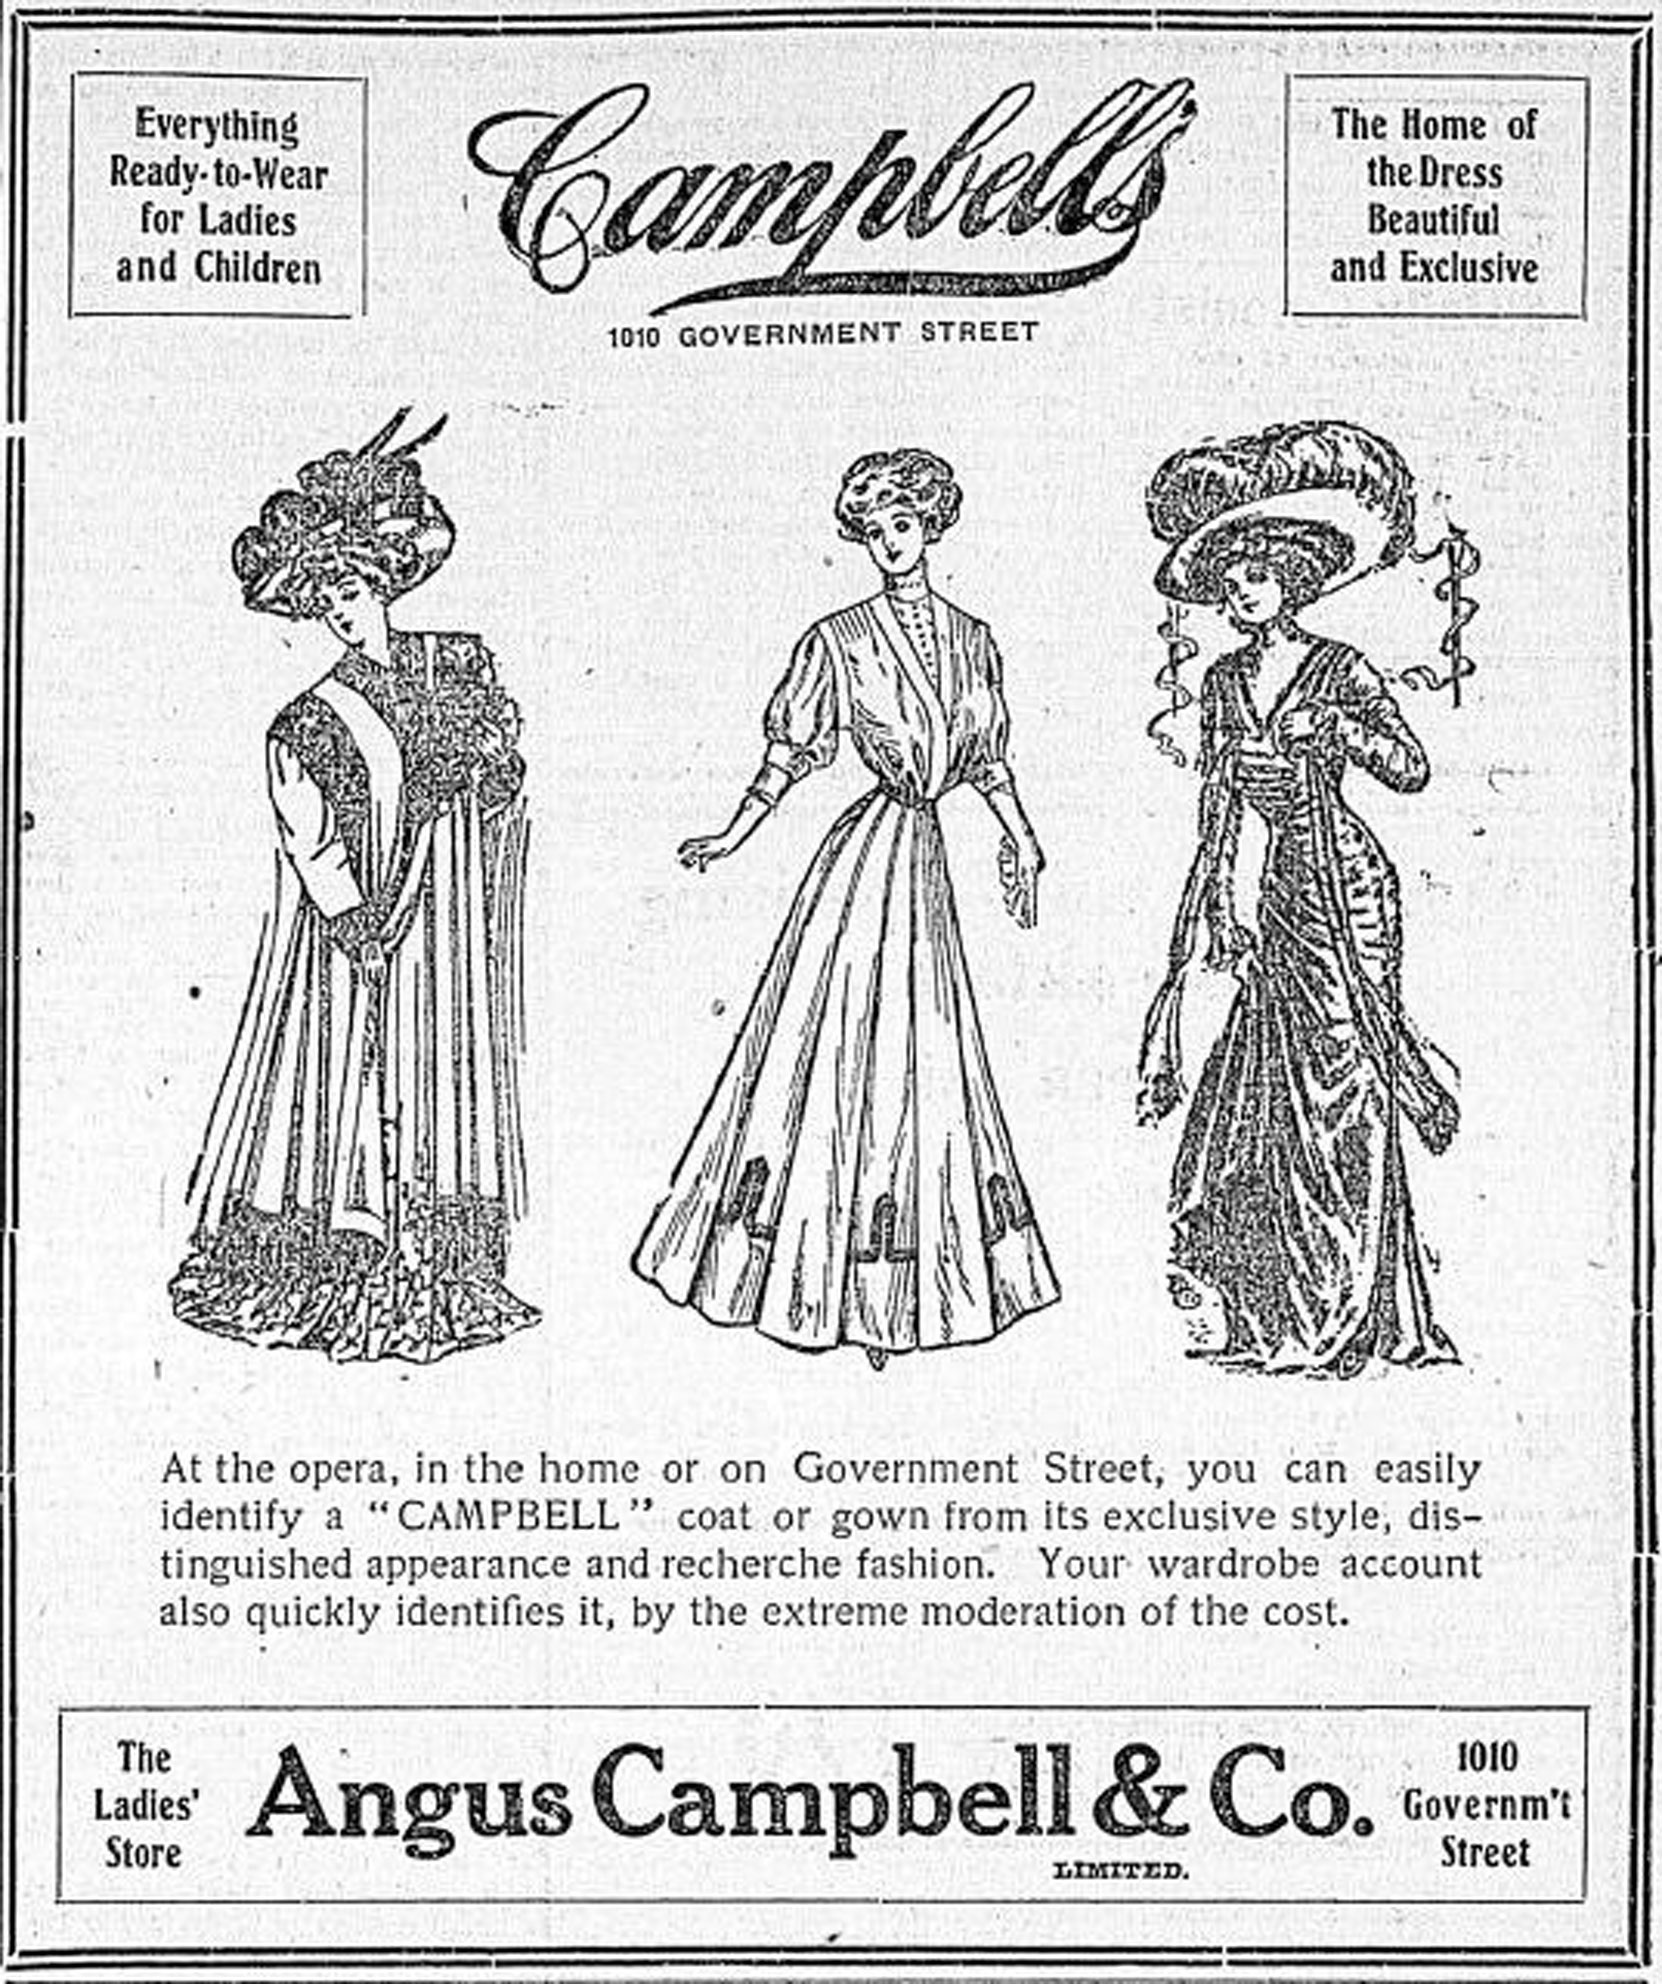 1908 advertisement for Angus Campbell & Co., 1010 Government Street (Victoria Online Sightseeing Tours collection)